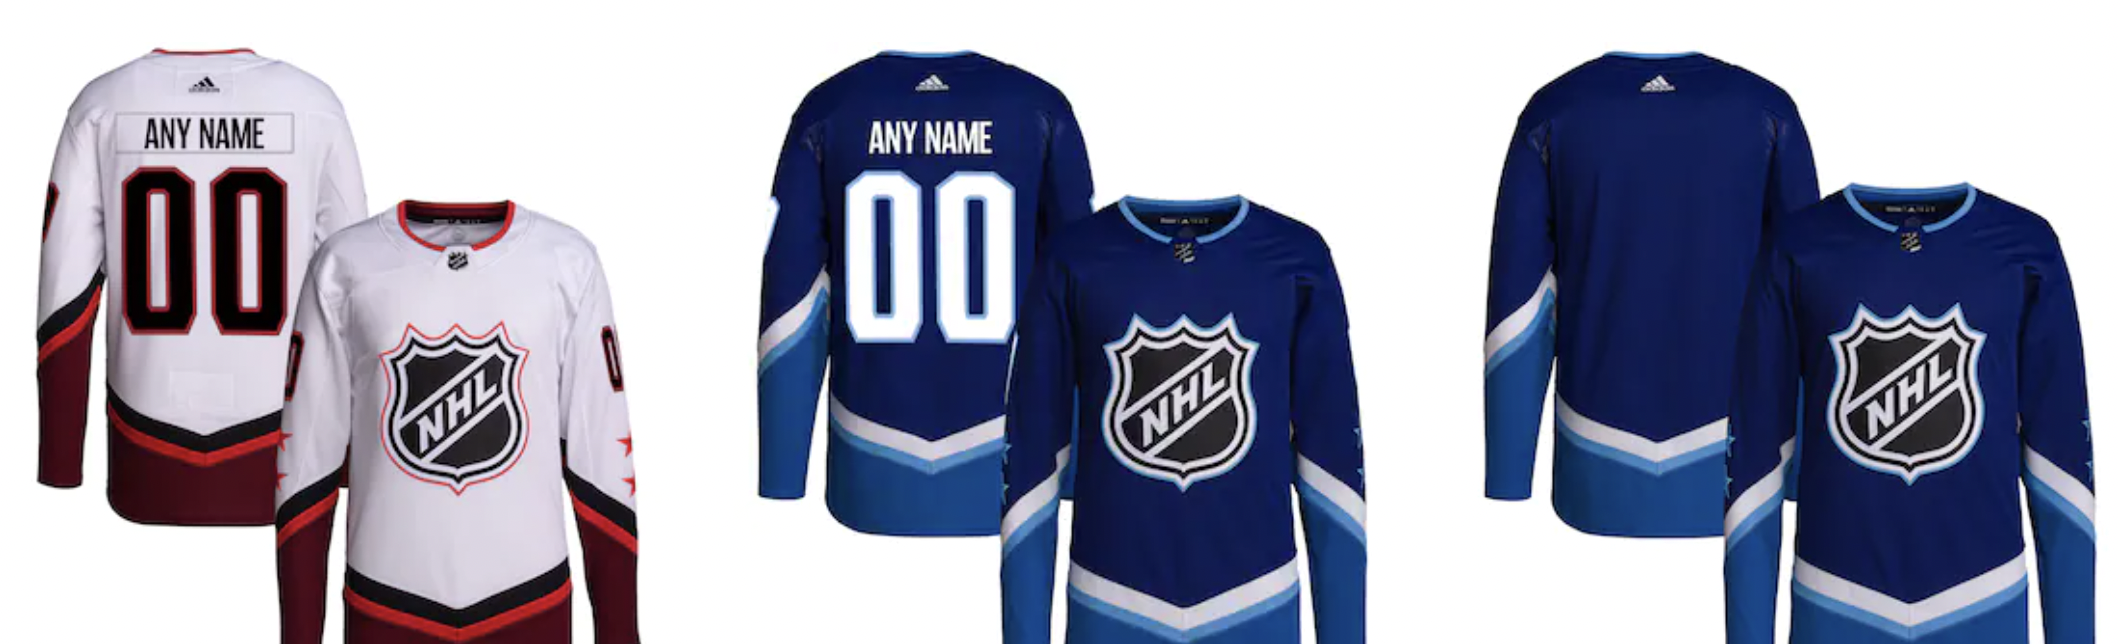 Where to buy NHL All-Star Game jerseys, shirts, hoodies and more